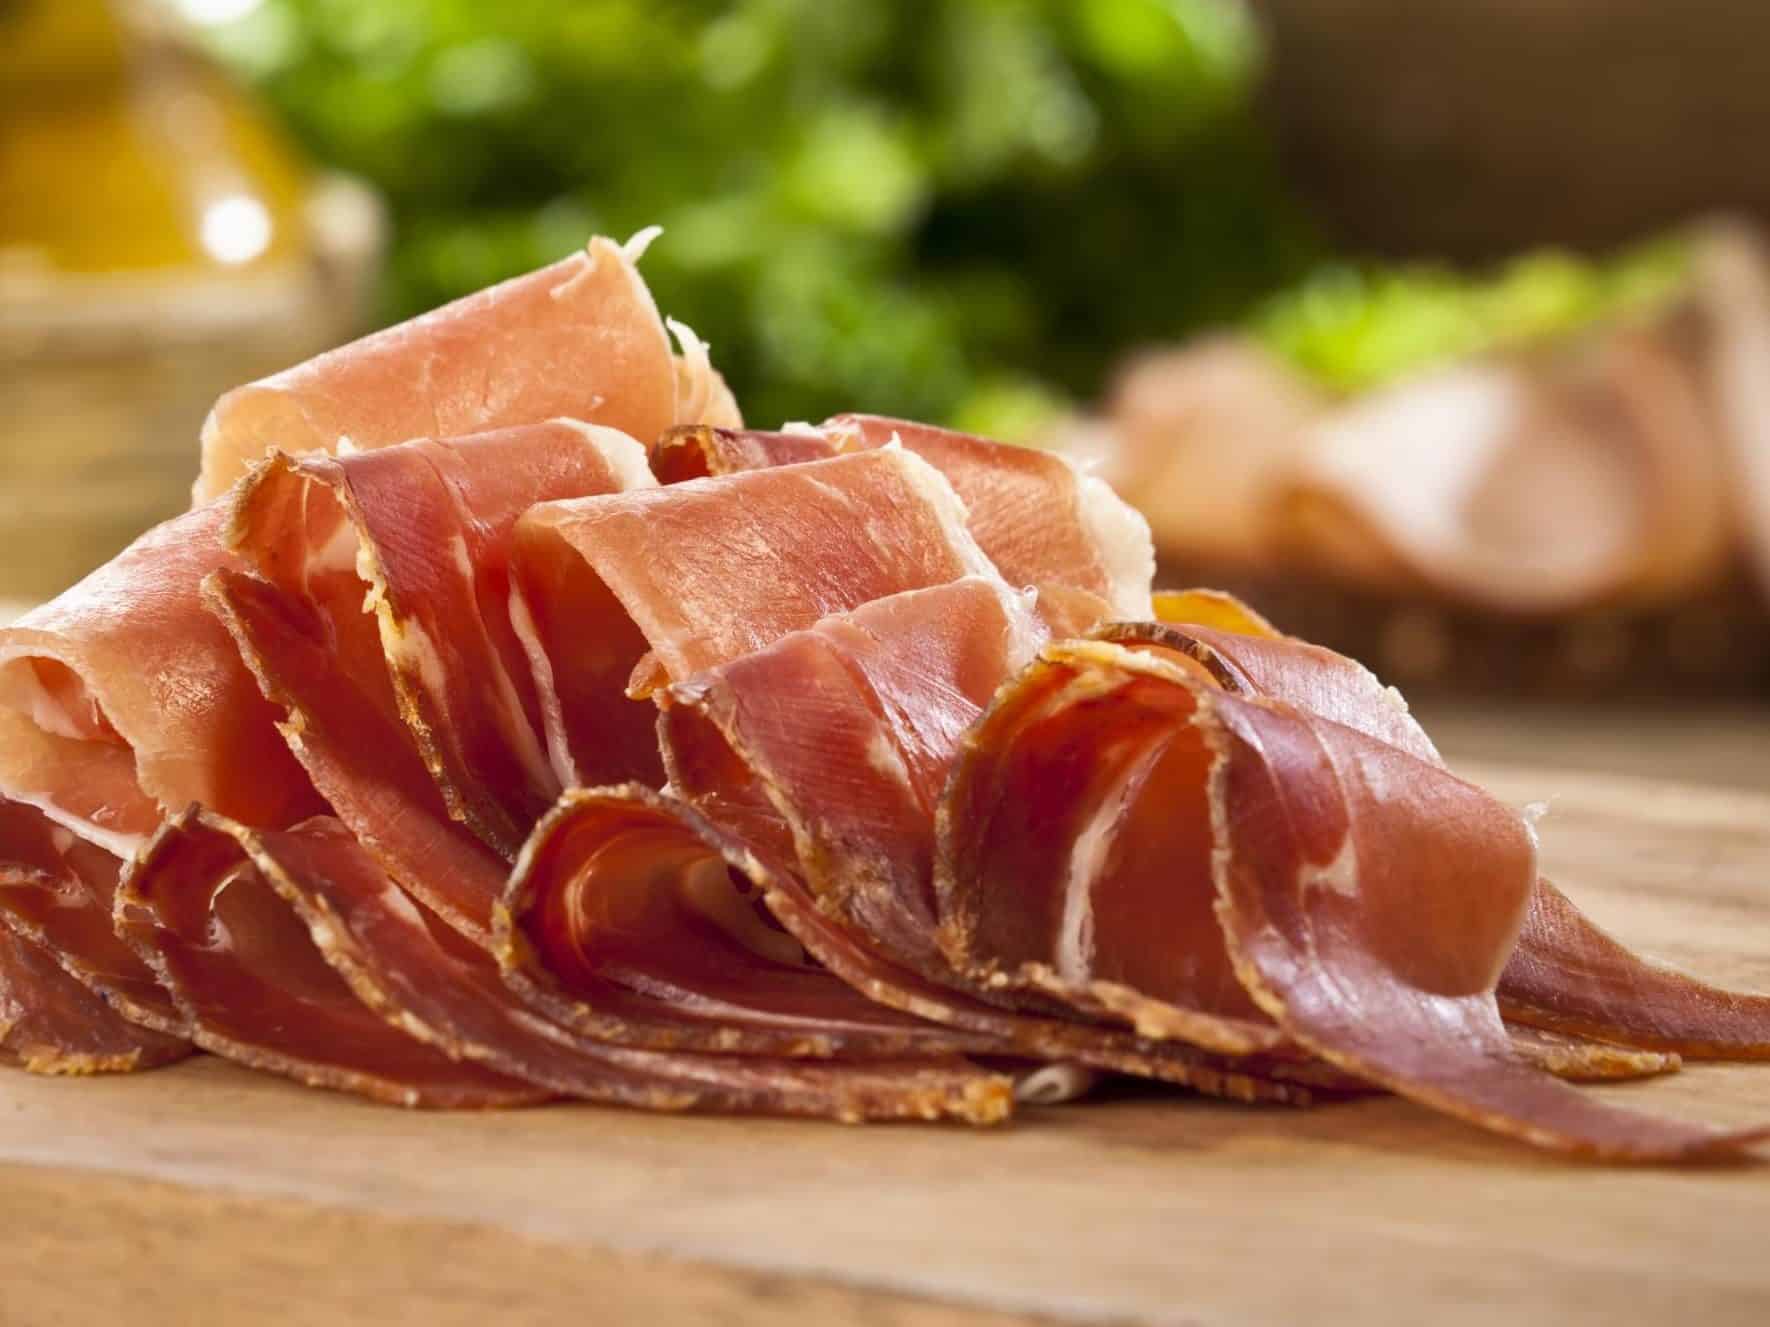 Thin slices of Prosciutto on wooden board